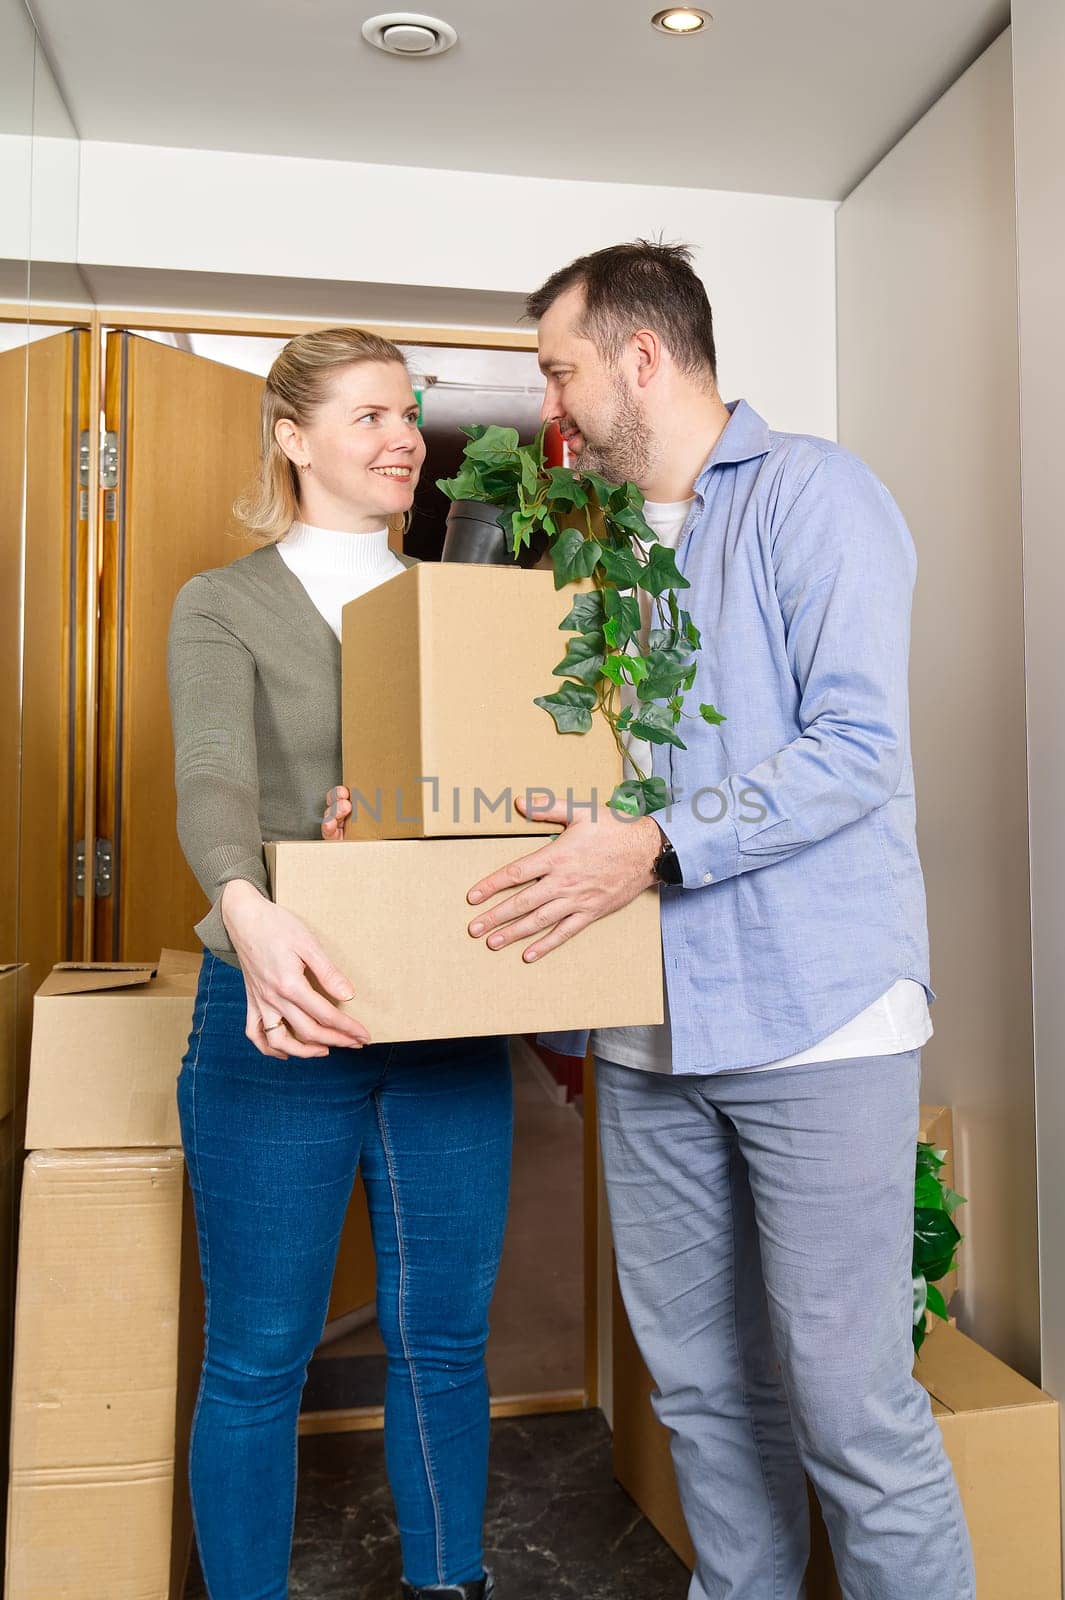 Happy couple moving in their new apartment carrying cardboard boxes. Young couple moving in new home. fun with cardboard boxes at moving day.